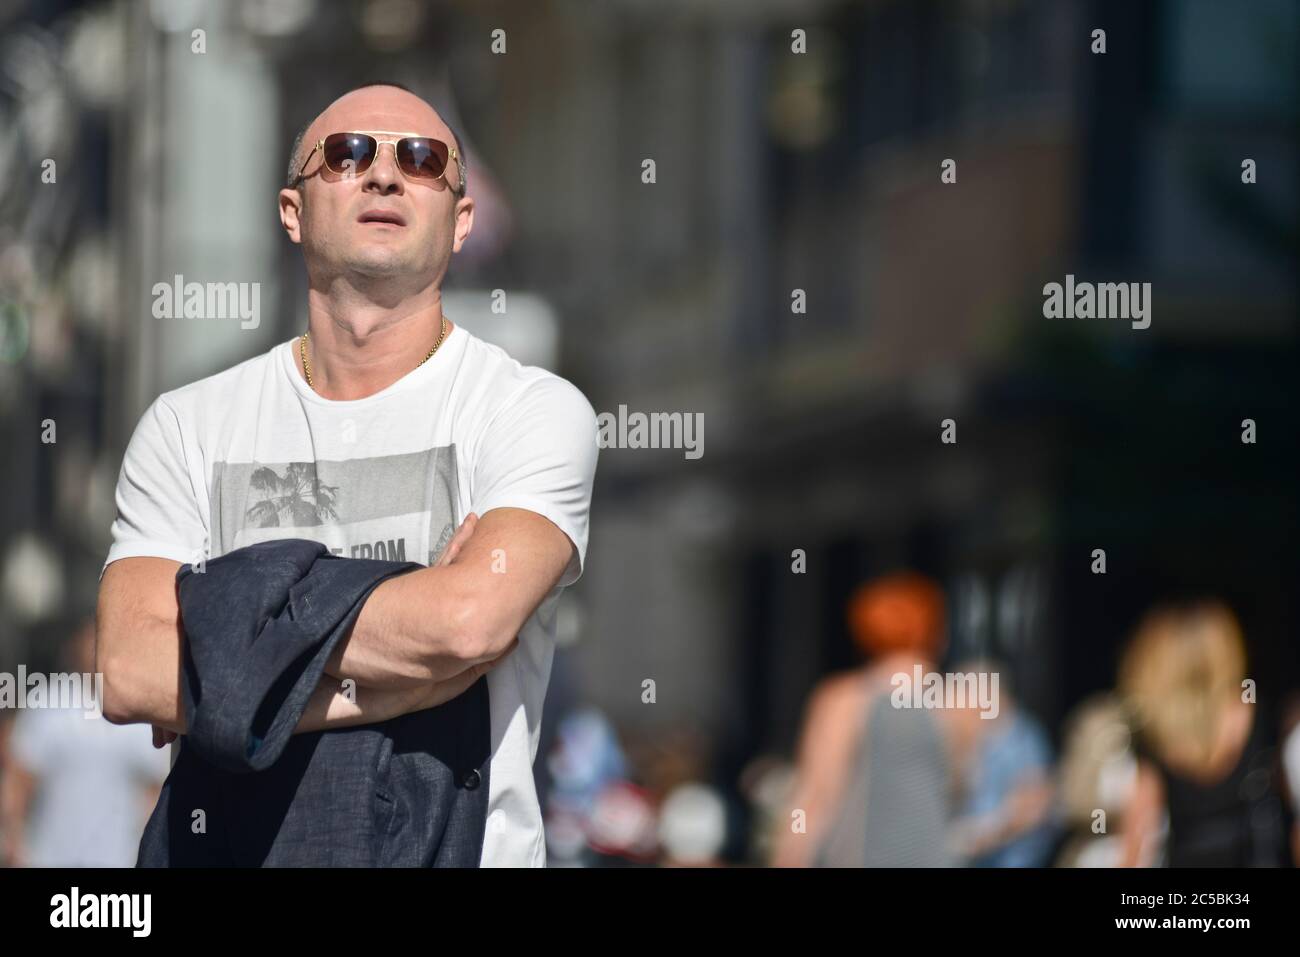 Muscular Bald Man with Sunglasses · Free Stock Photo